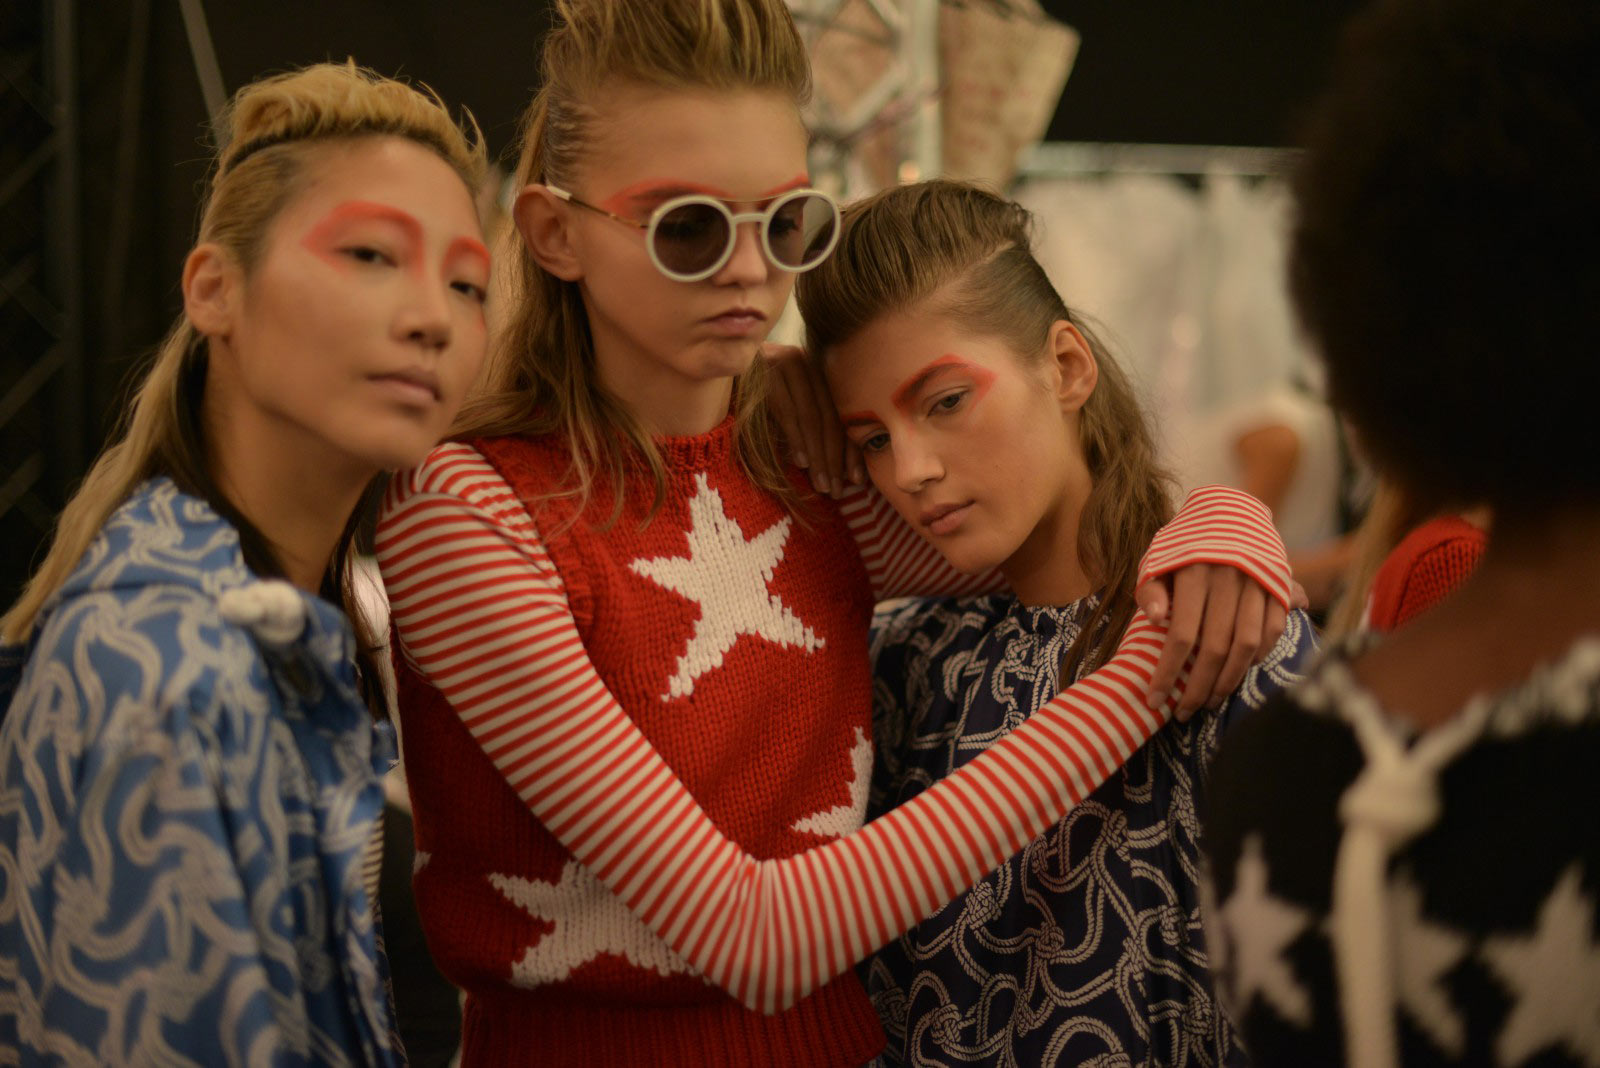 Backstage close-up of the models at Max Mara's SS16 fashion show in milan. 